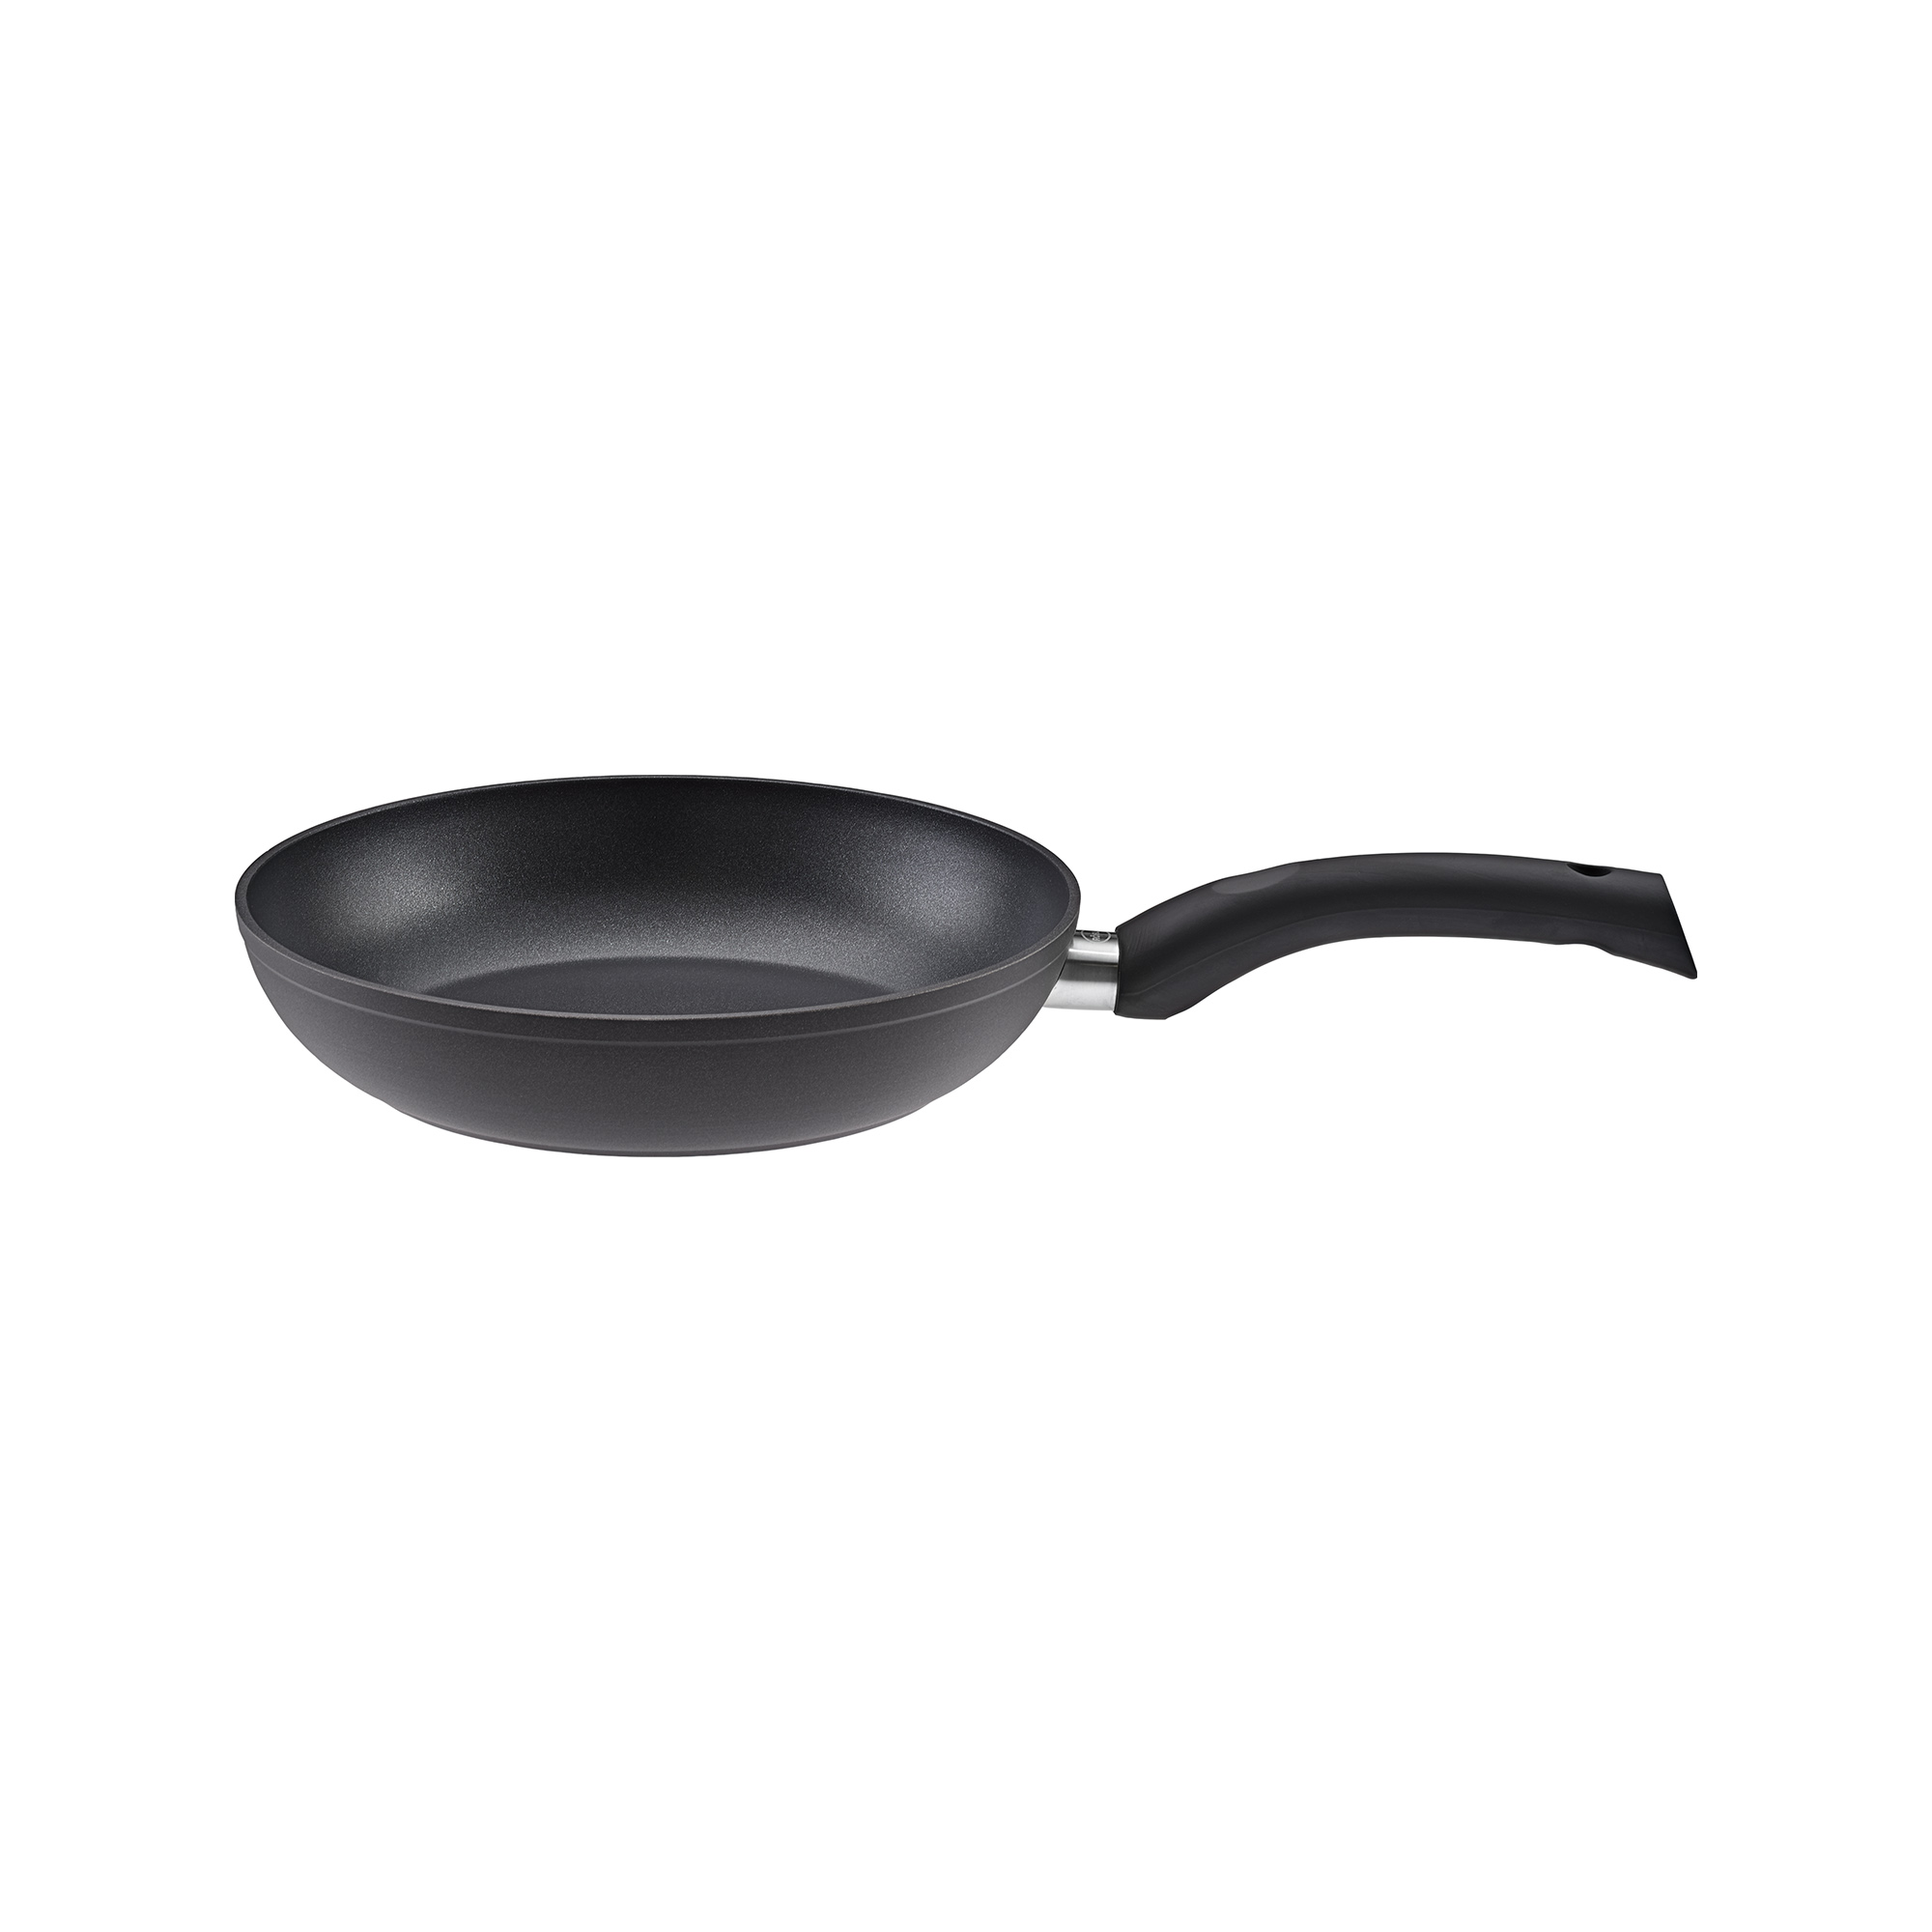 Frying pan "Moments" Ø 20 cm with non-stick coating ProPlex